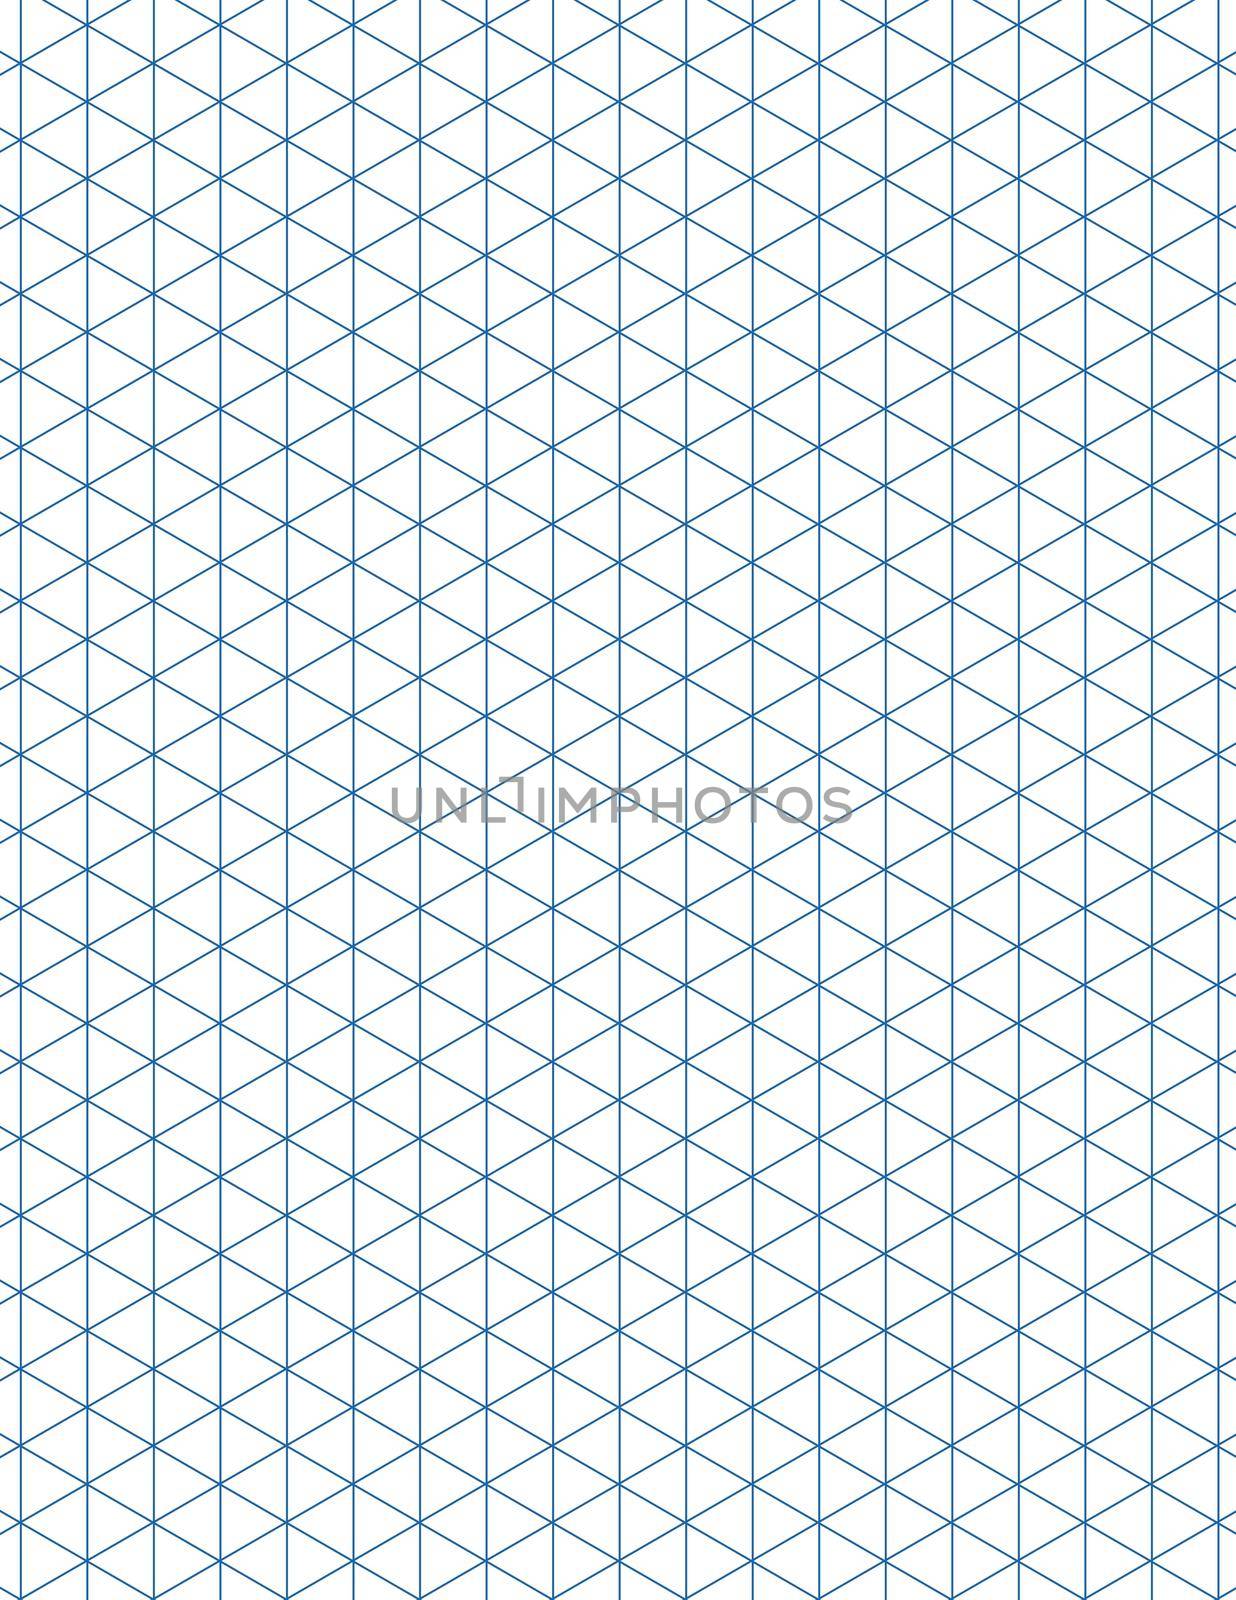 Graph paper. Printable isometric color grid paper with color lines. Geometric background for school, textures, notebook, diary, notes, print, books. Realistic lined paper blank size Letter by allaku